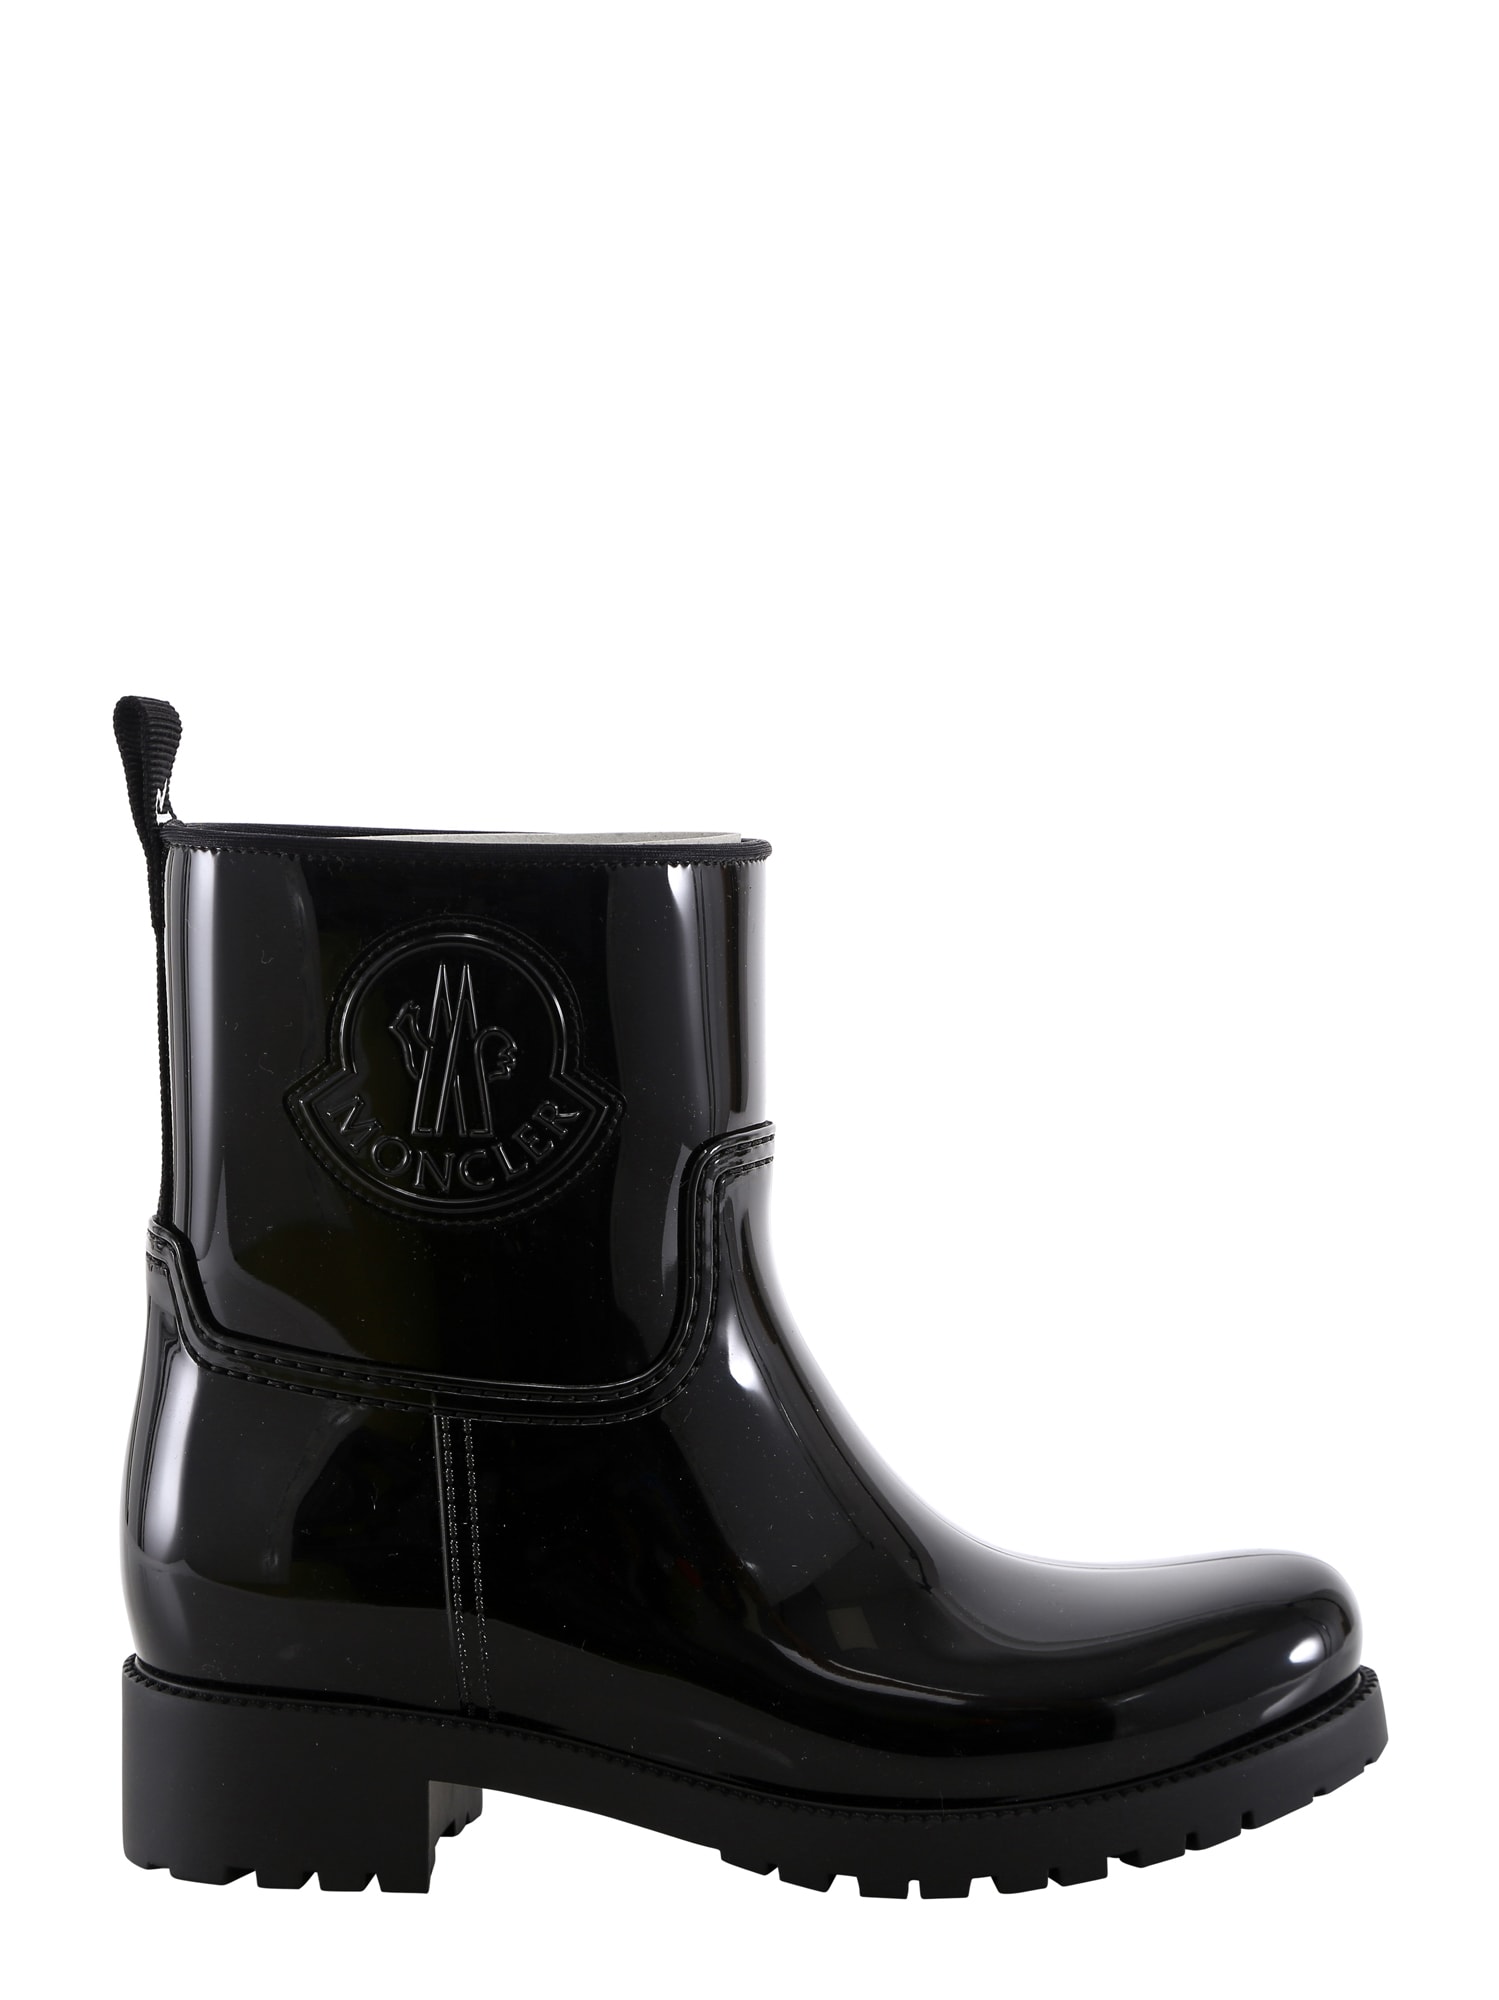 Buy Moncler Ankle Boots online, shop Moncler shoes with free shipping